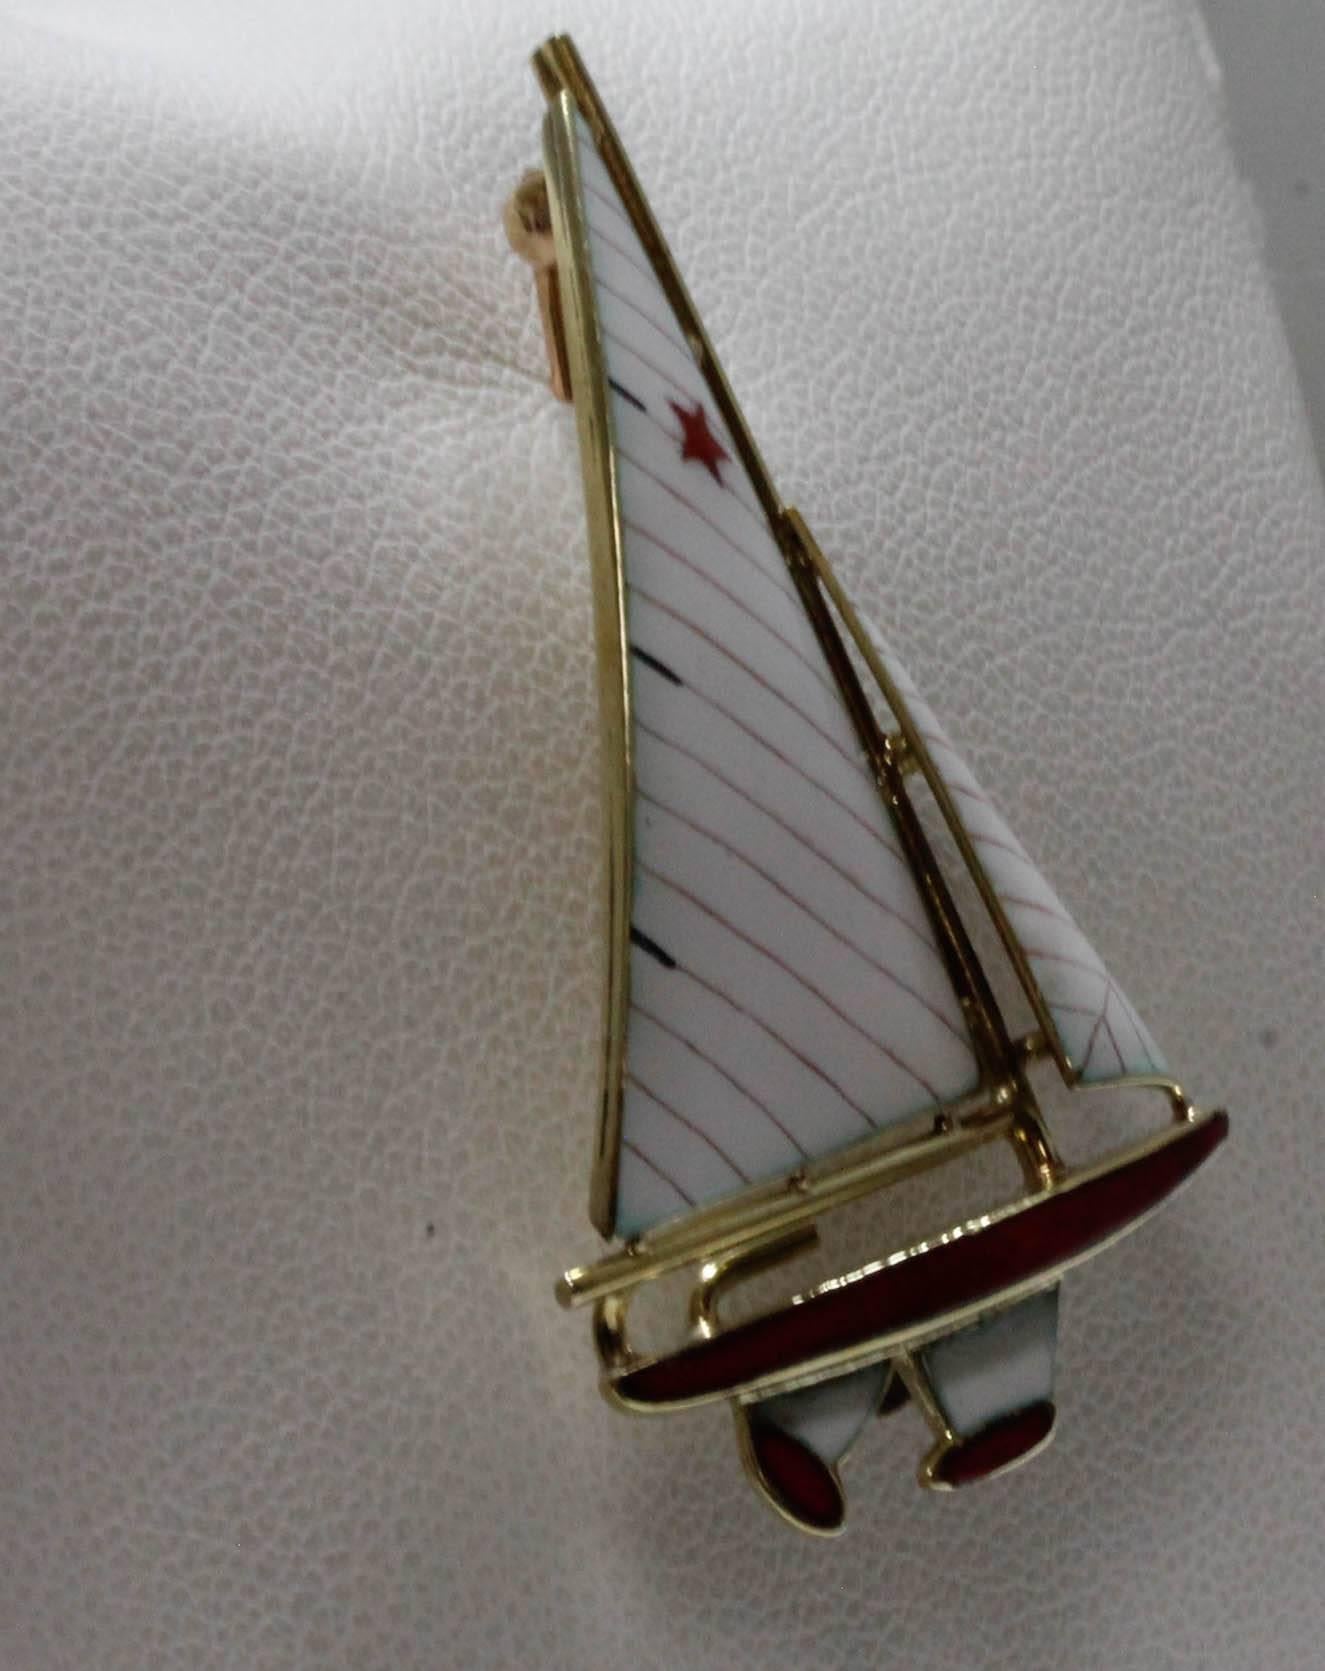 14 Karat Yellow Gold and Enamel Red and White Sailboat Brooch/Pin In Excellent Condition For Sale In Santa Fe, NM